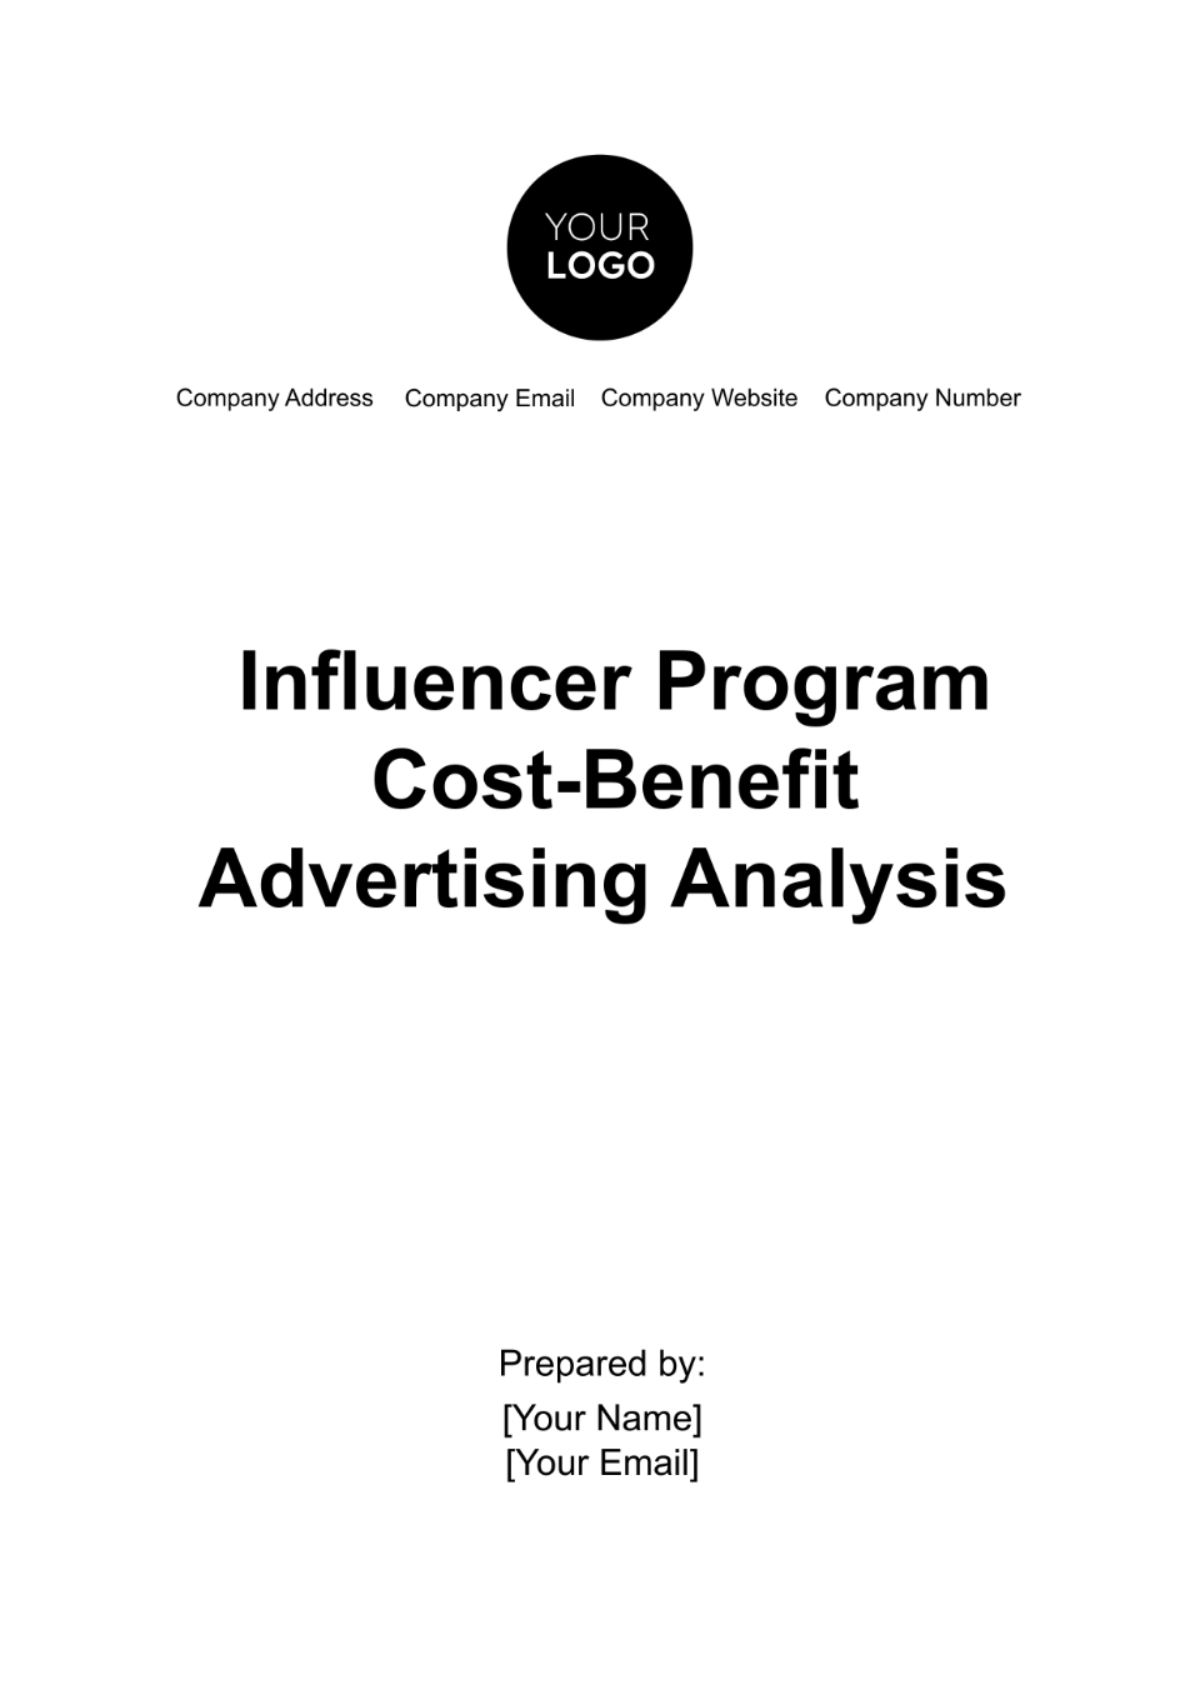 Free Influencer Program Cost-Benefit Advertising Analysis Template